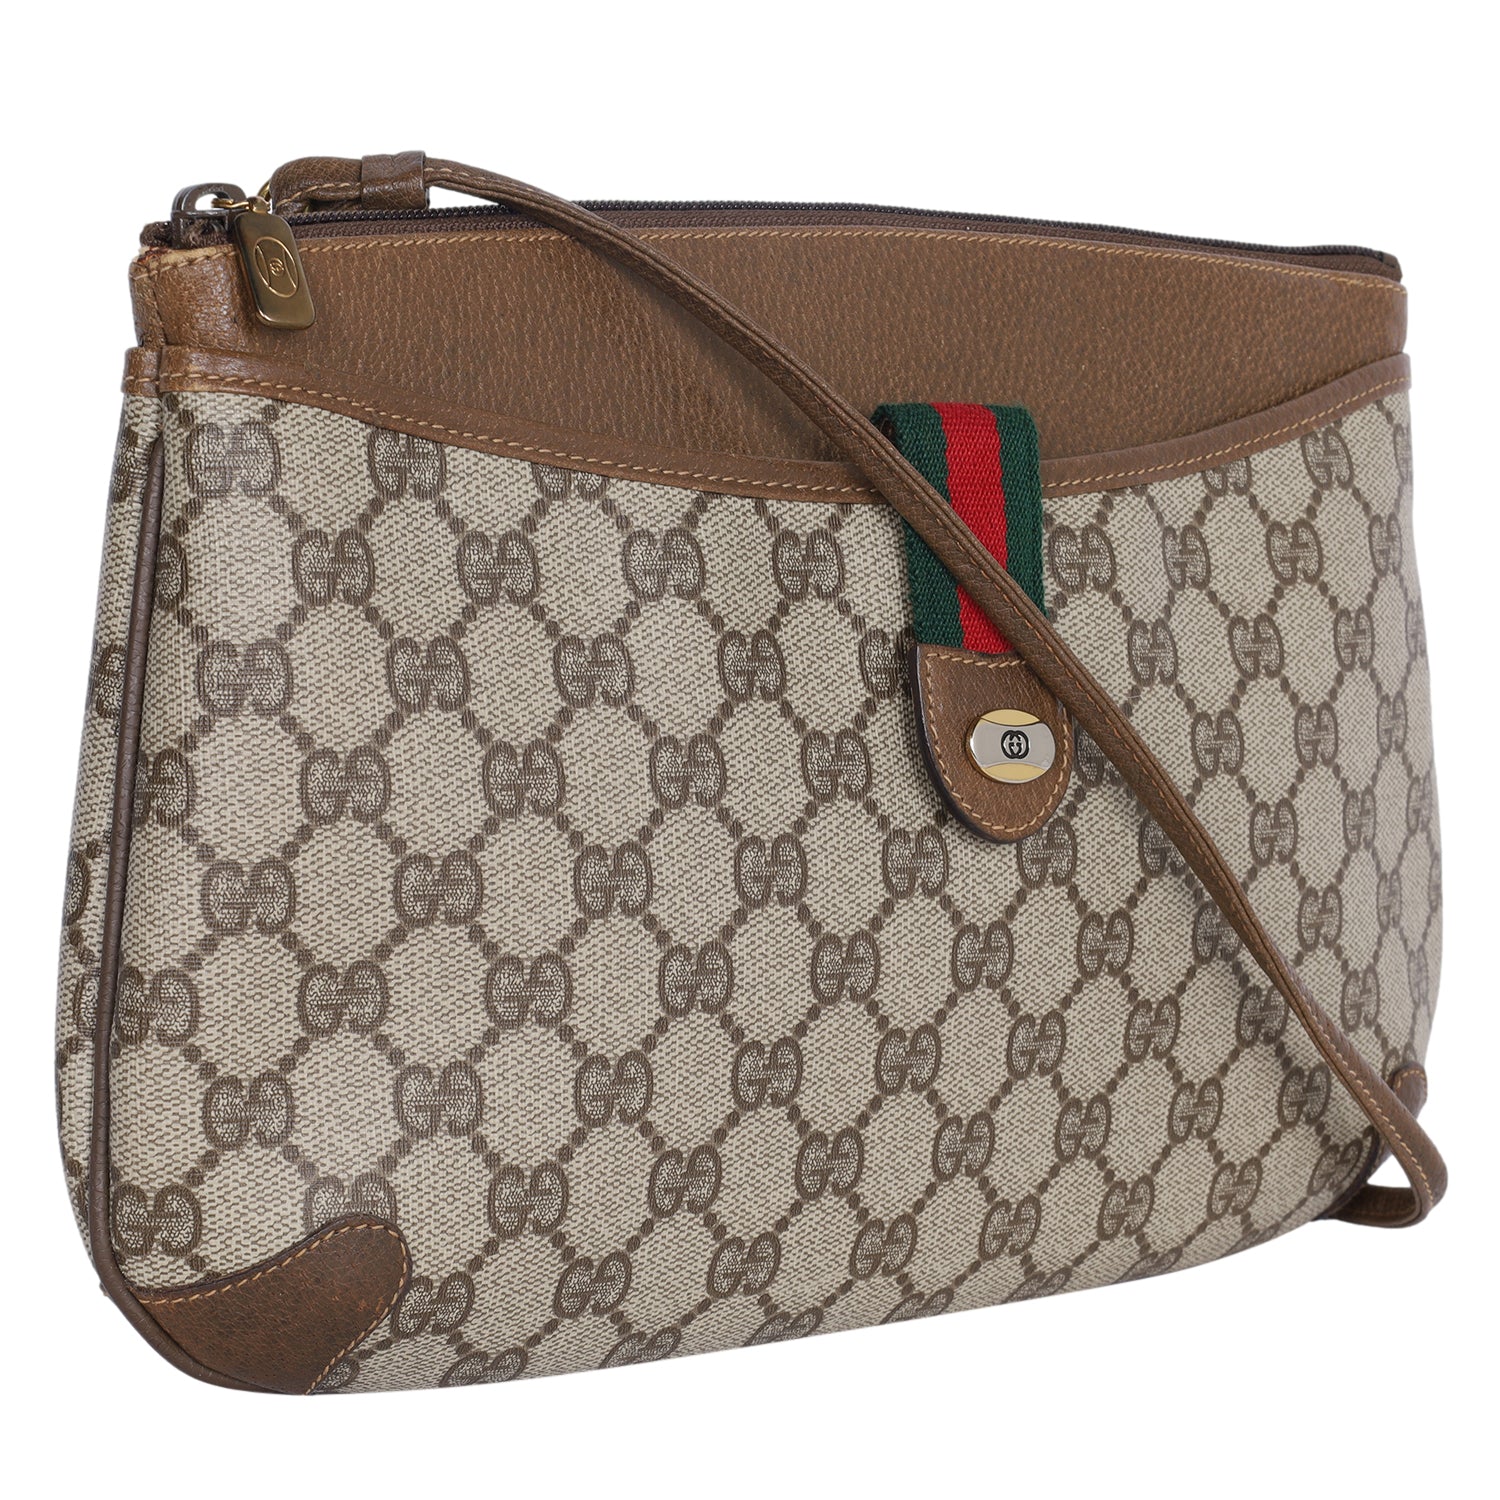 Gucci GG Supreme Monogram Ophidia Wristlet Pouch. Made In Italy.